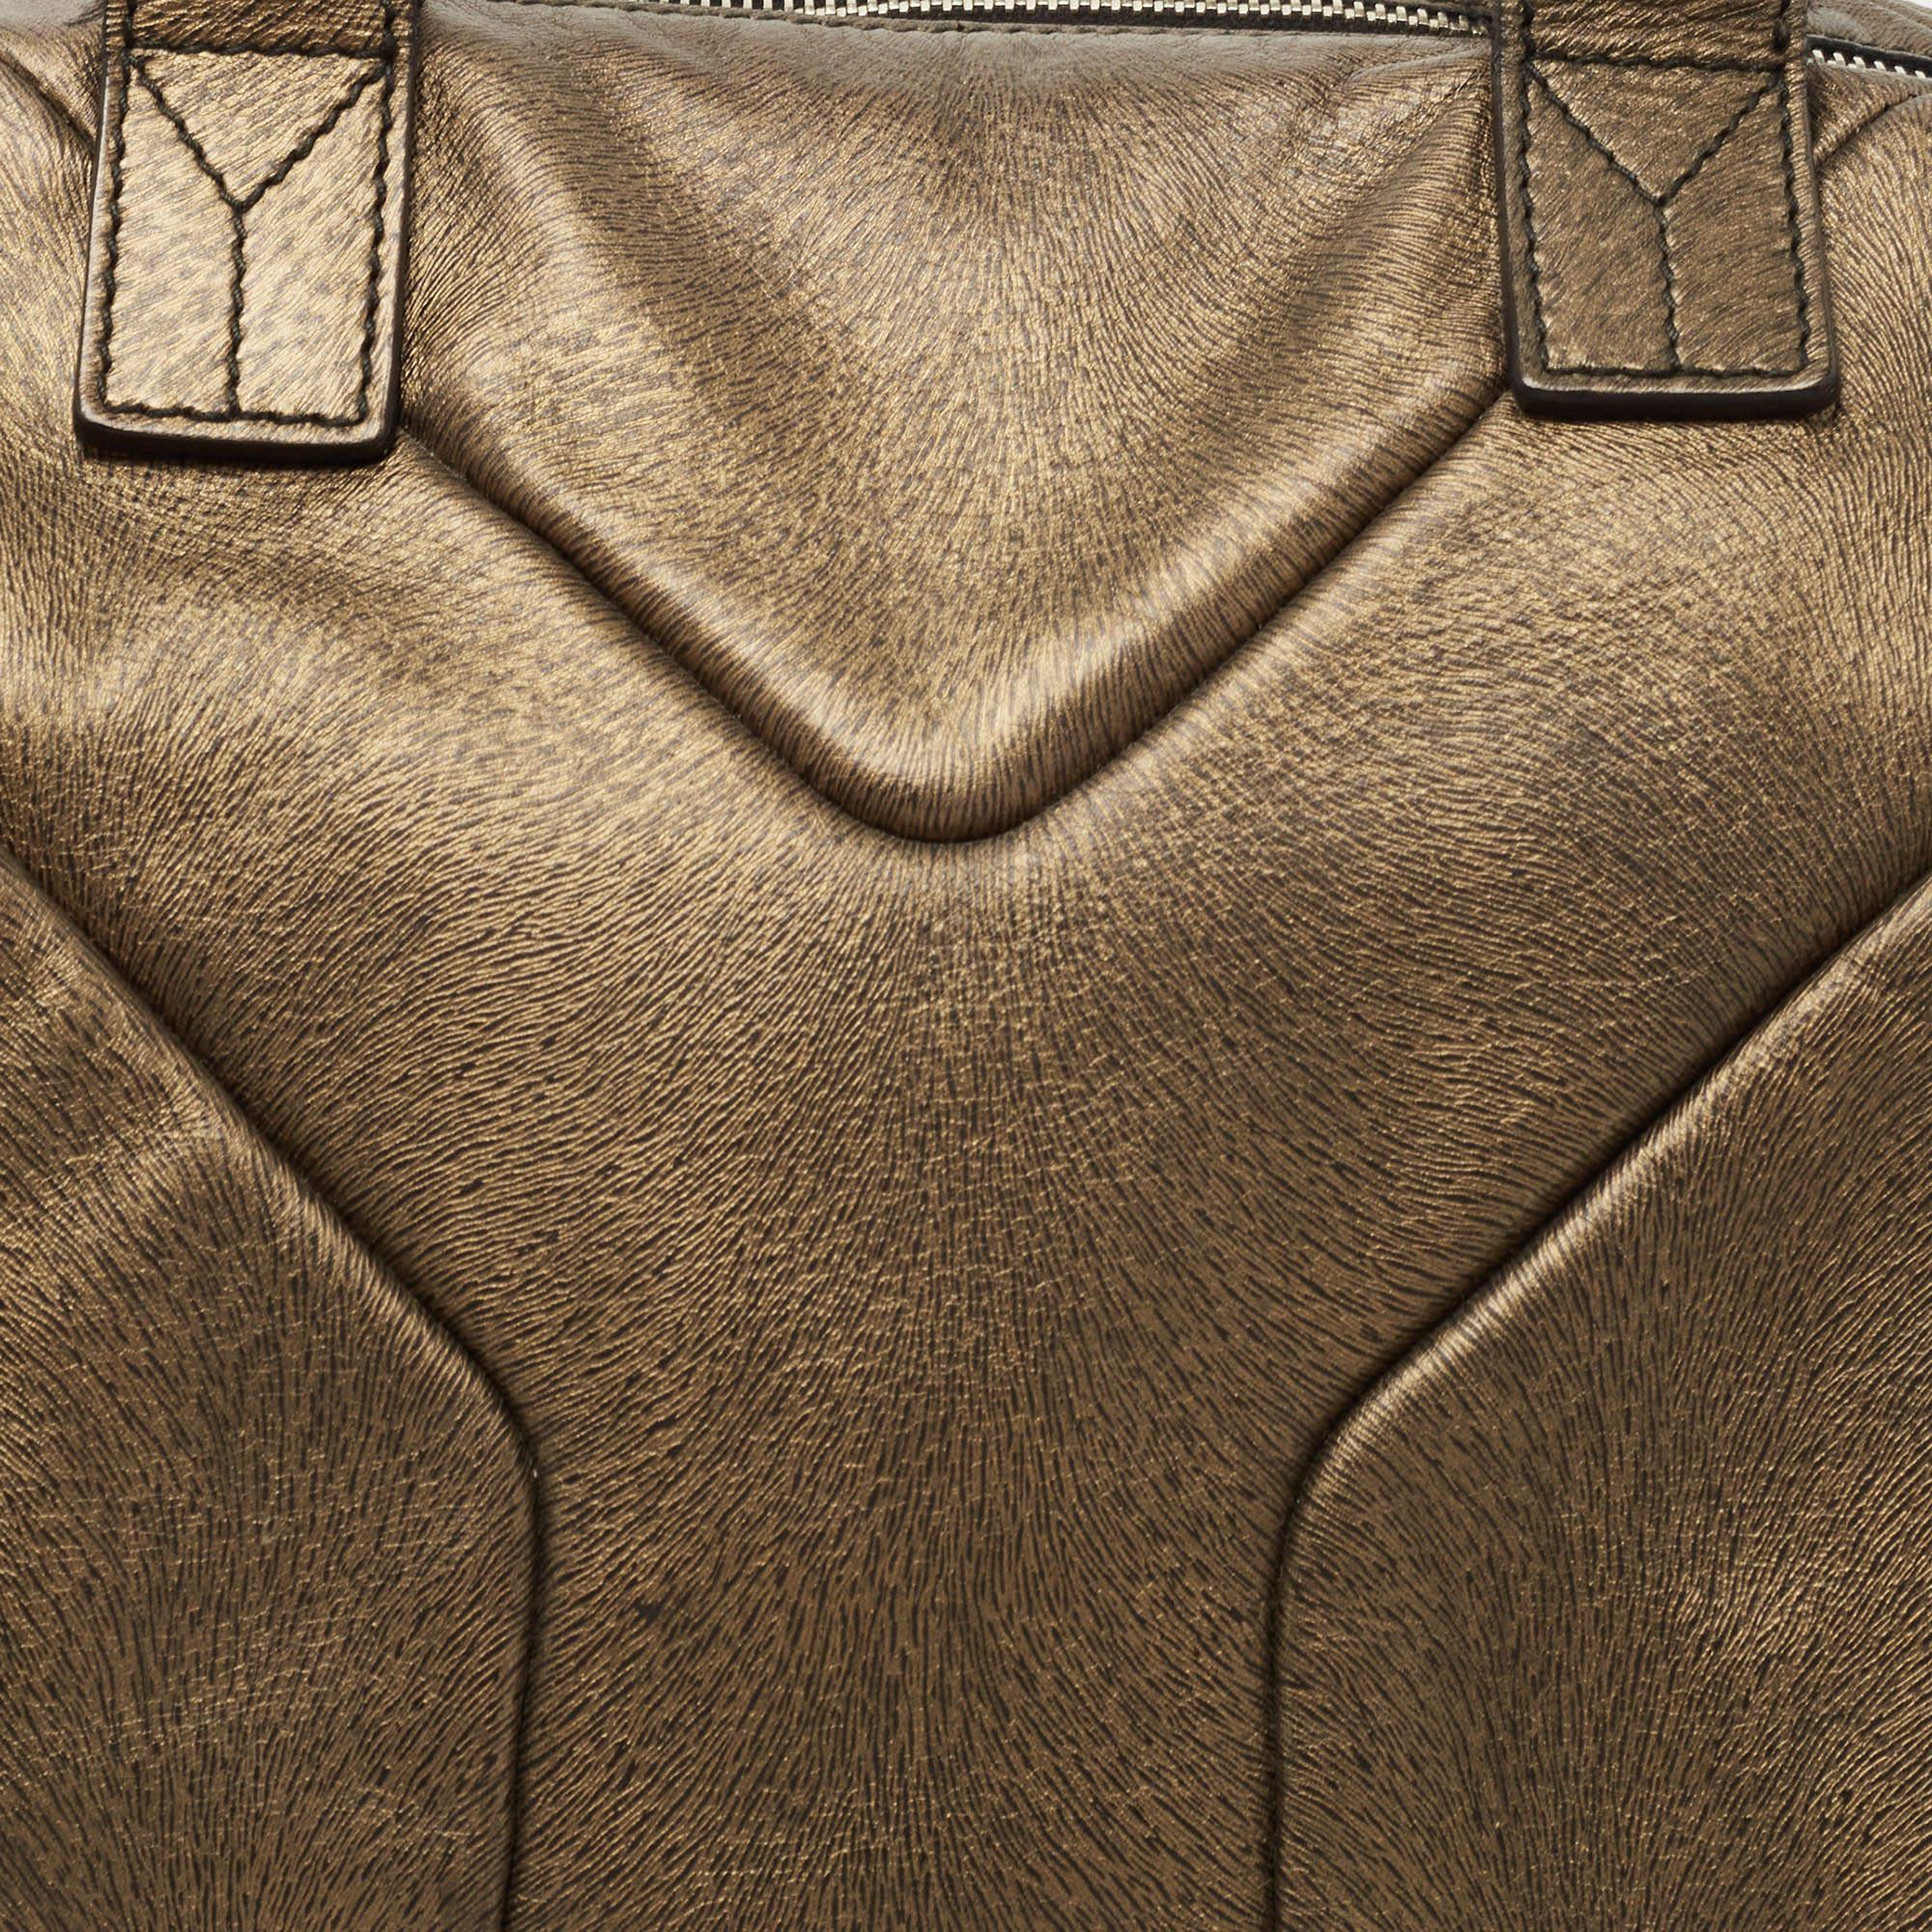 Yves Saint Laurent Gold Textured Leather Easy Y Satchel 2